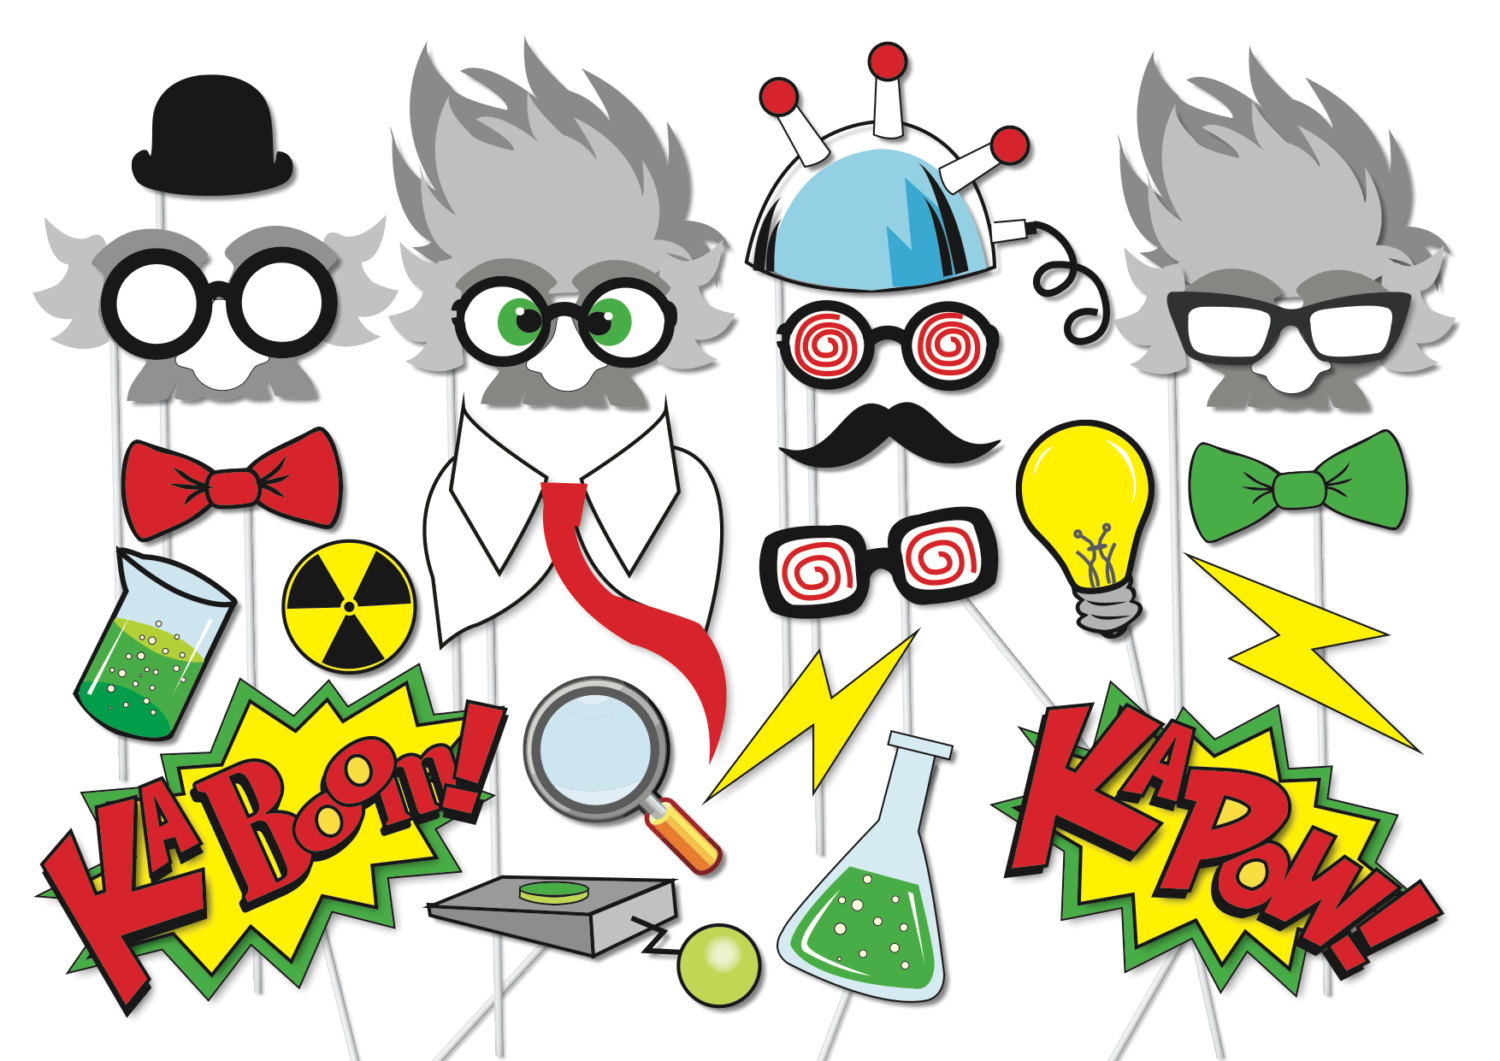 Mad scientist Party Props Set 23 Piece by TheQuirkyQuail on Etsy